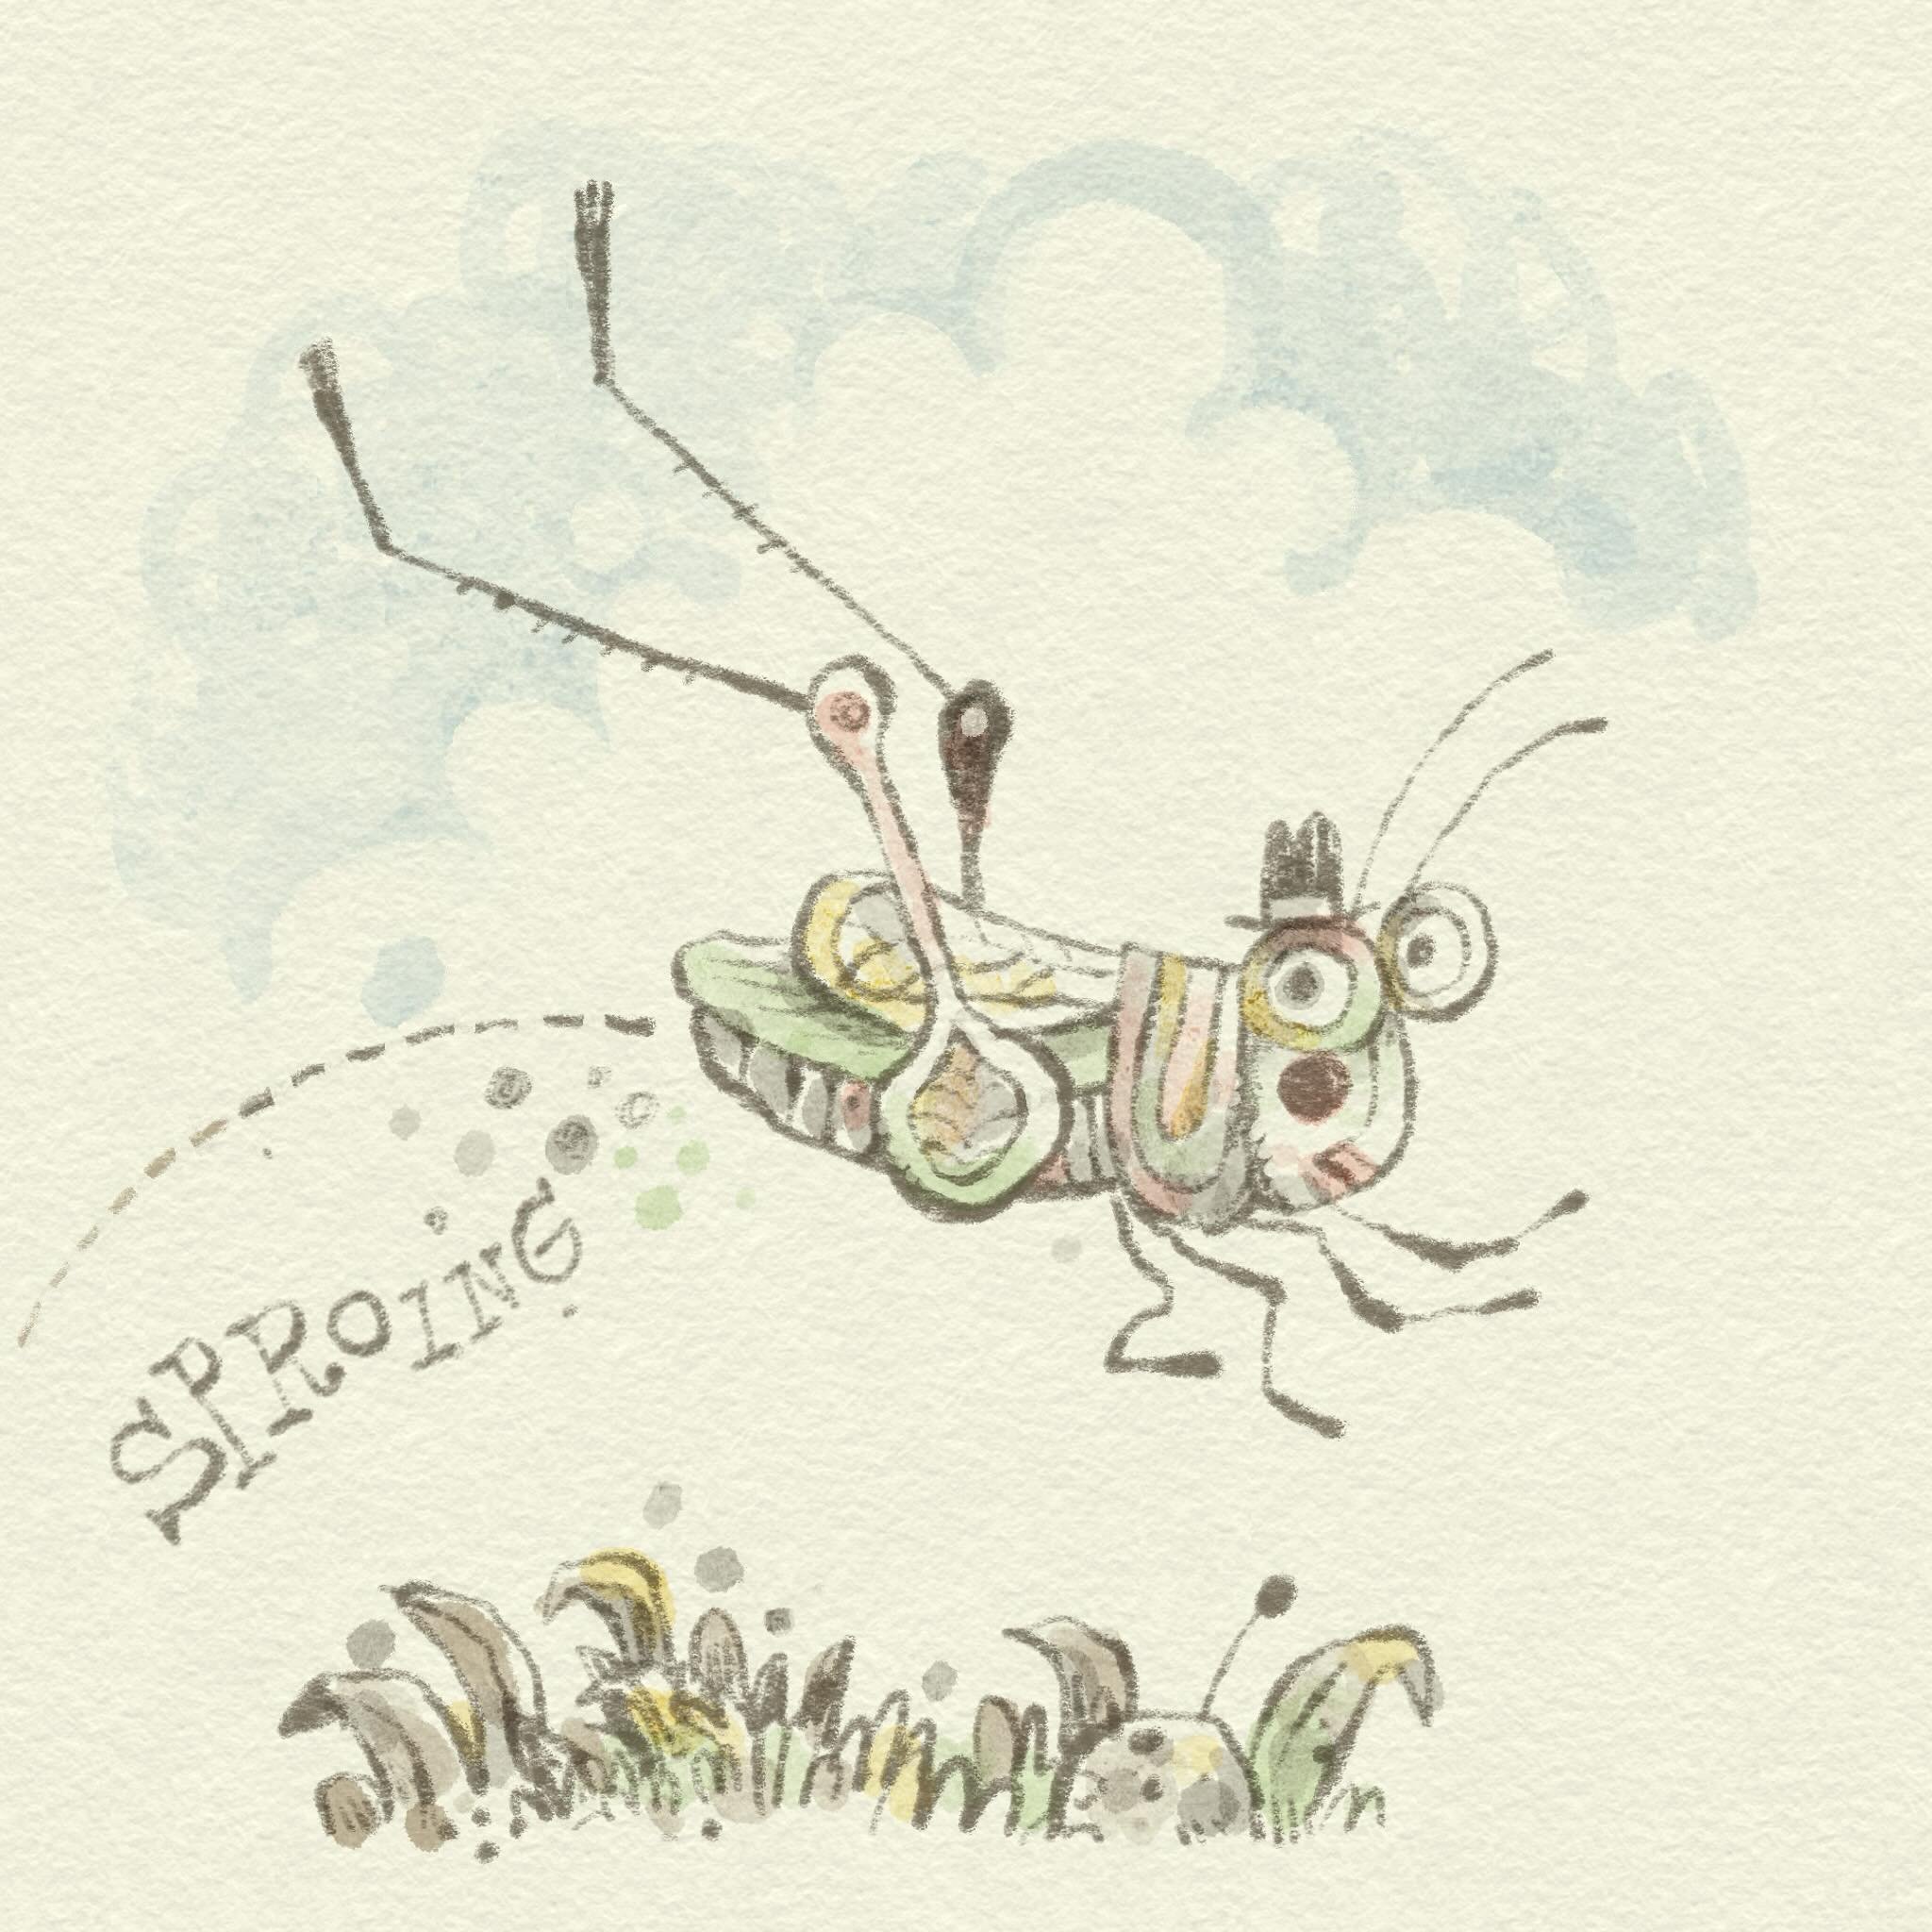 Writing an impatient grasshopper story. Drawing impatient grasshoppers. Having fun with this iPad pencil watercolor thing. Looking at a LOT of Arnold Lobel lately.